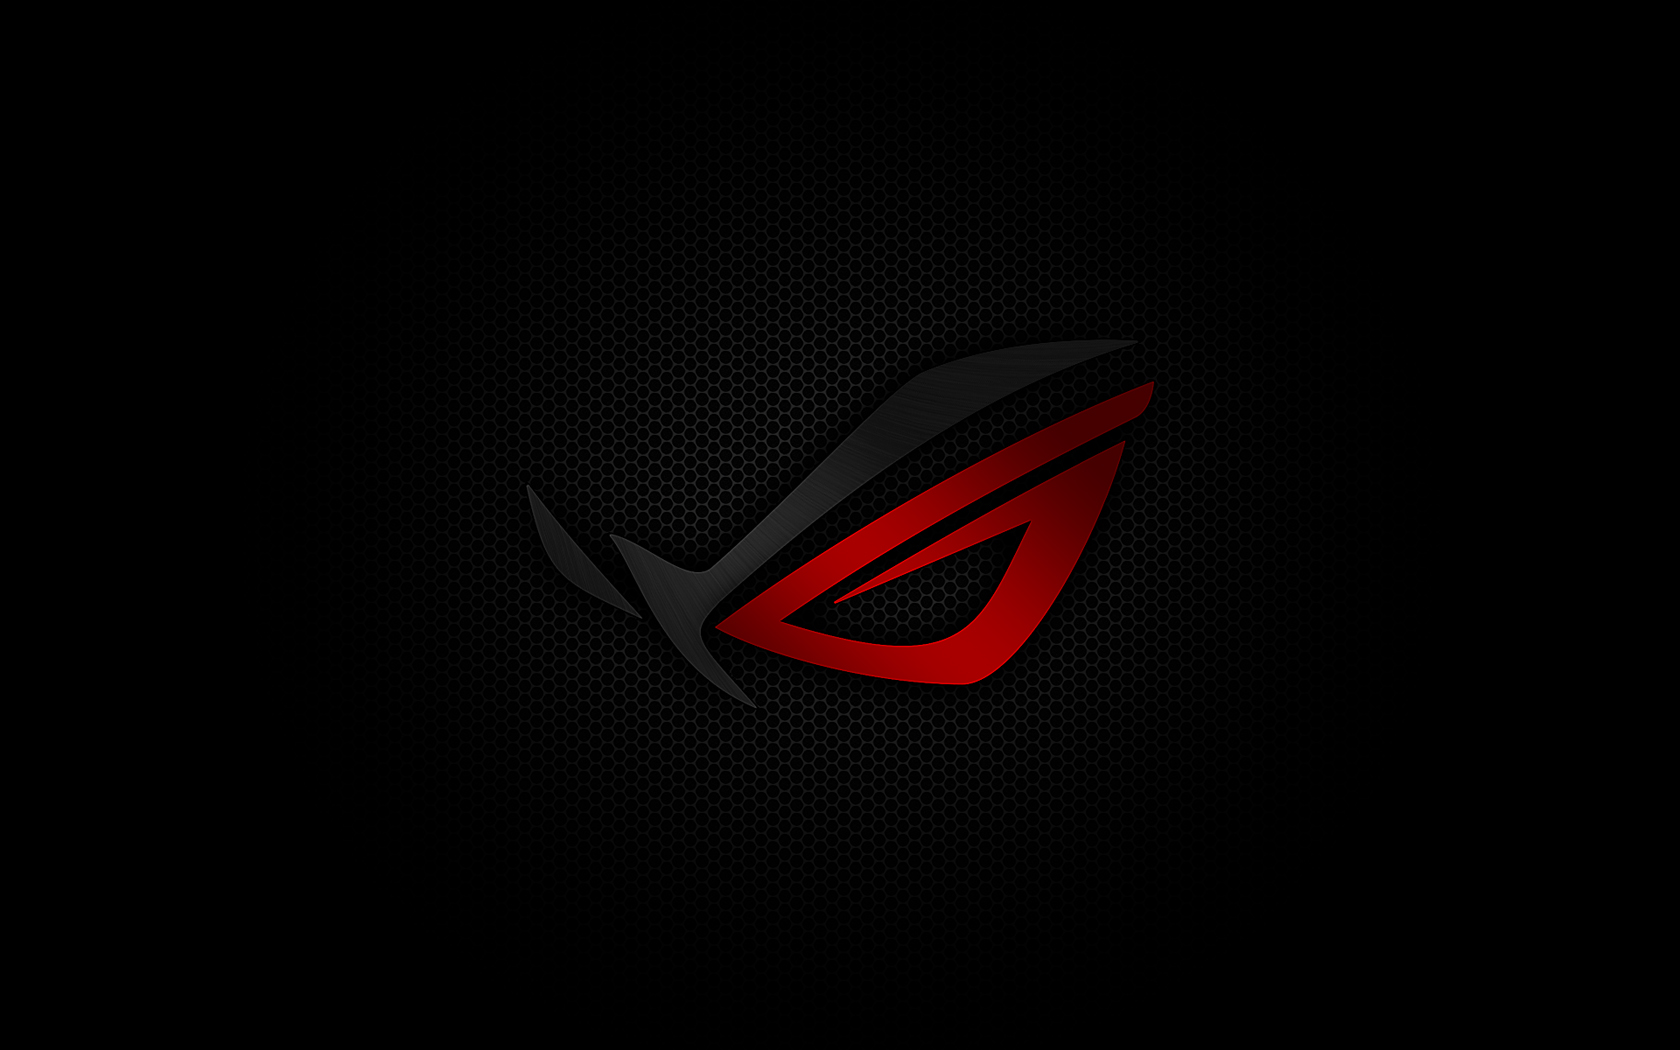 ASUS ROG Wallpaper Pack by BlaCkOuT1911 on